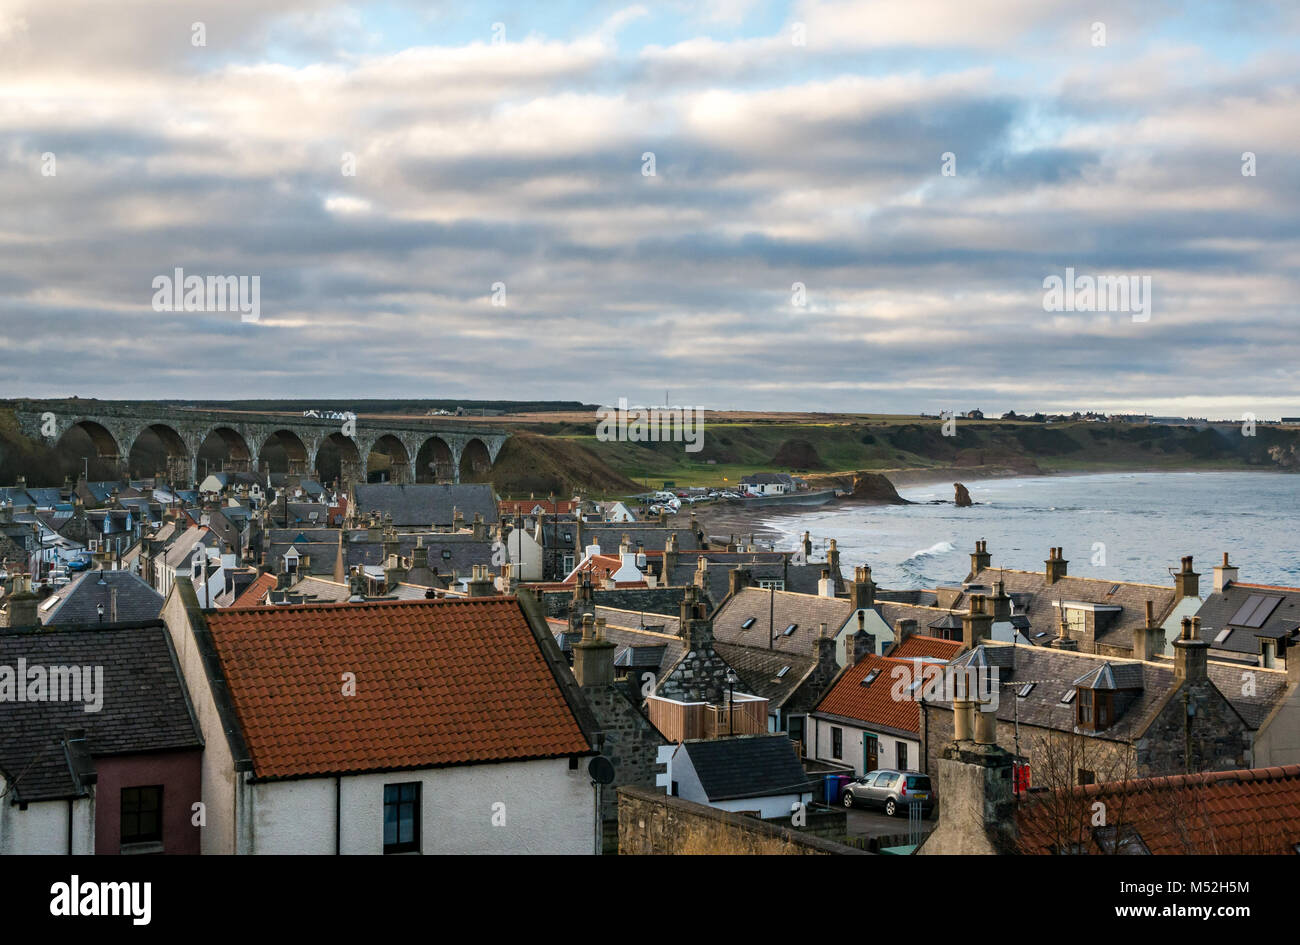 View of picturesque seaside town cottages, Victorian railway viaduct and sea stacks on beach in bay, Cullen, Moray, Scotland, UK Stock Photo